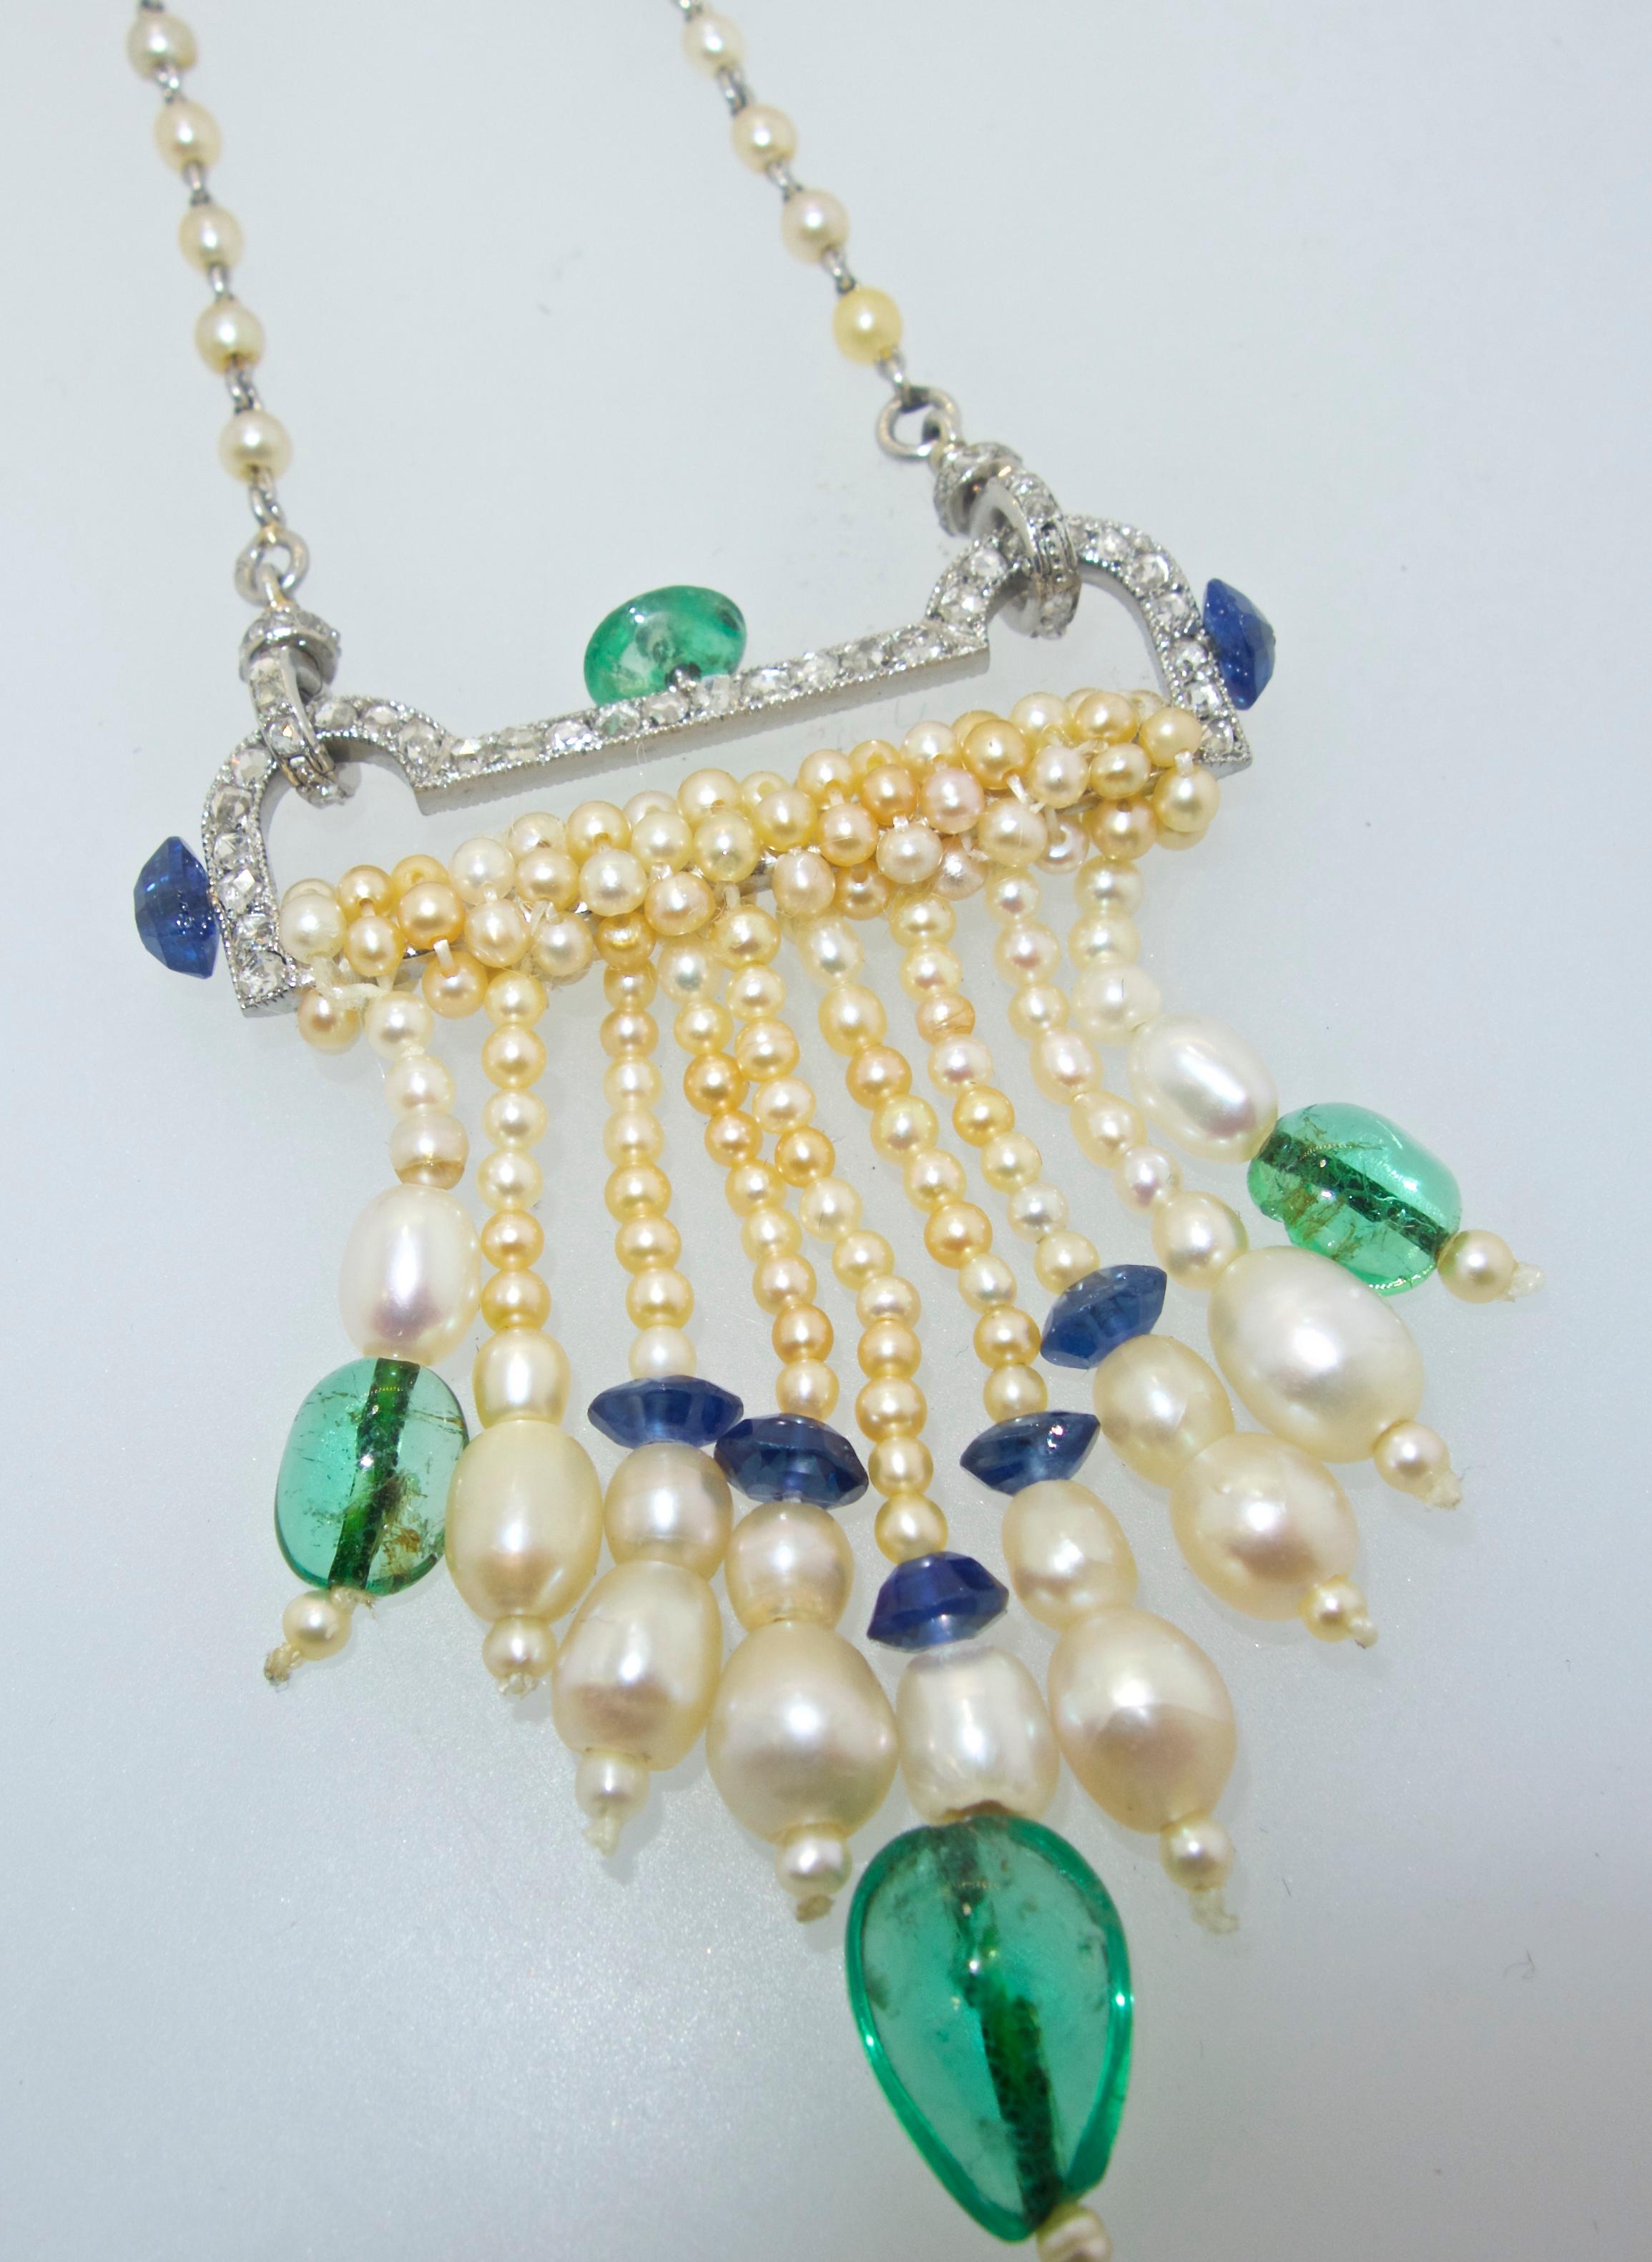 French Art Deco  25.5 inches long with French hallmarks on the natural pearl and rose cut diamond chain which suspends the Art Deco pendant which is composed of rose cut diamonds, sapphires and emeralds.  The pendant is 2.5 inches long and can be